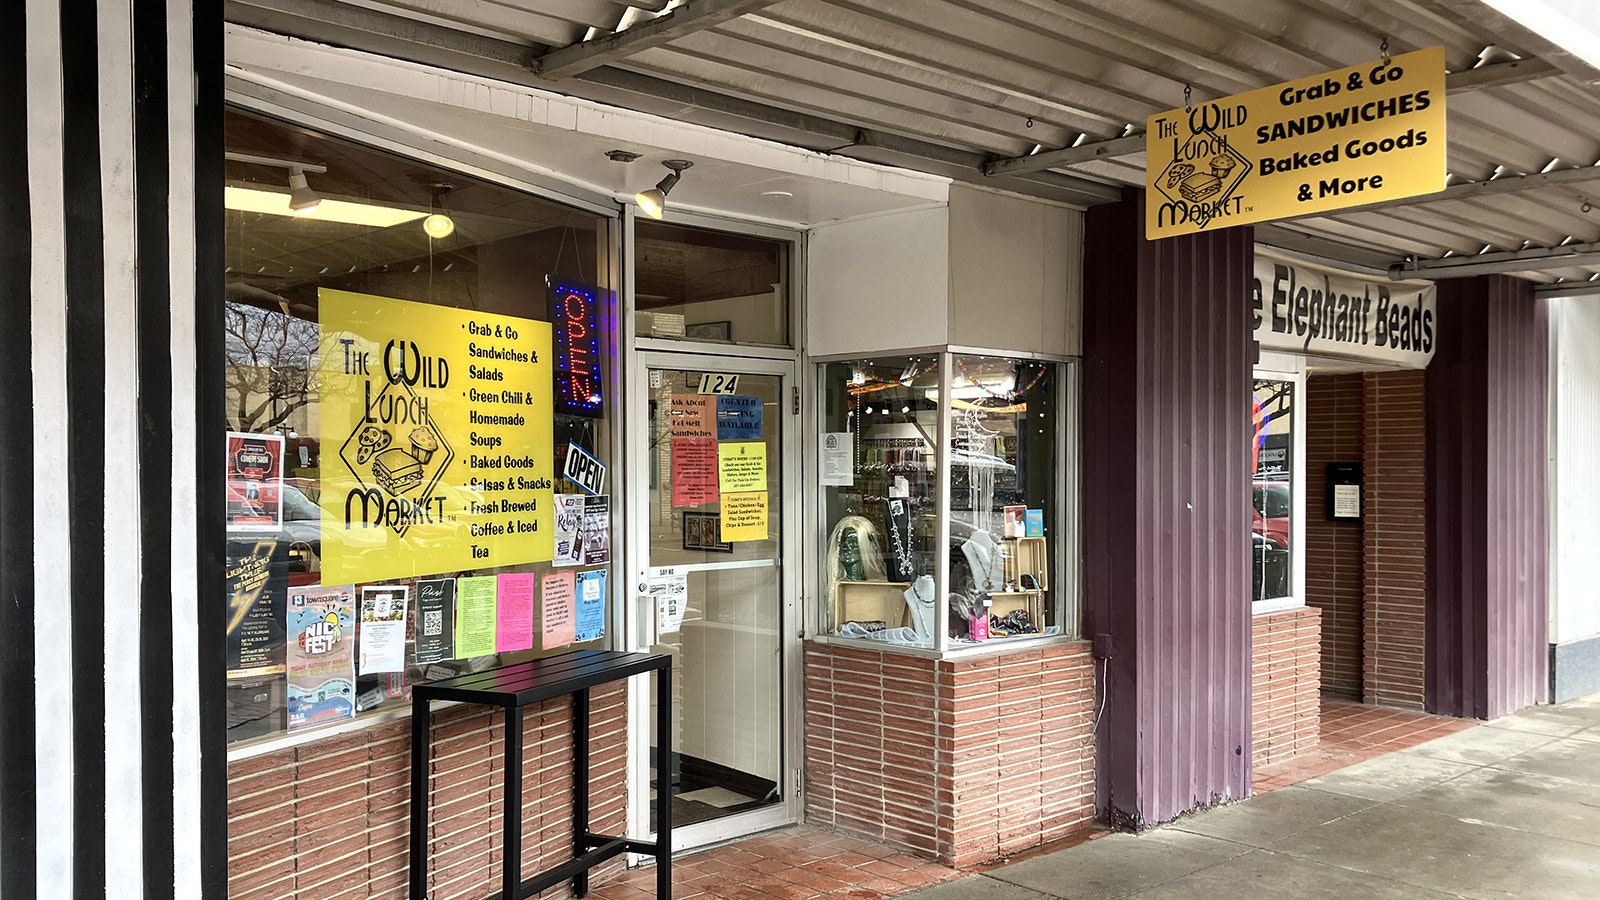 The Wild Lunch Market in downtown Casper at 124 E. 2nd St. offers customers grab and go sandwiches, soups, salads, baked goods, and fresh coffee, tea, and cold drinks.